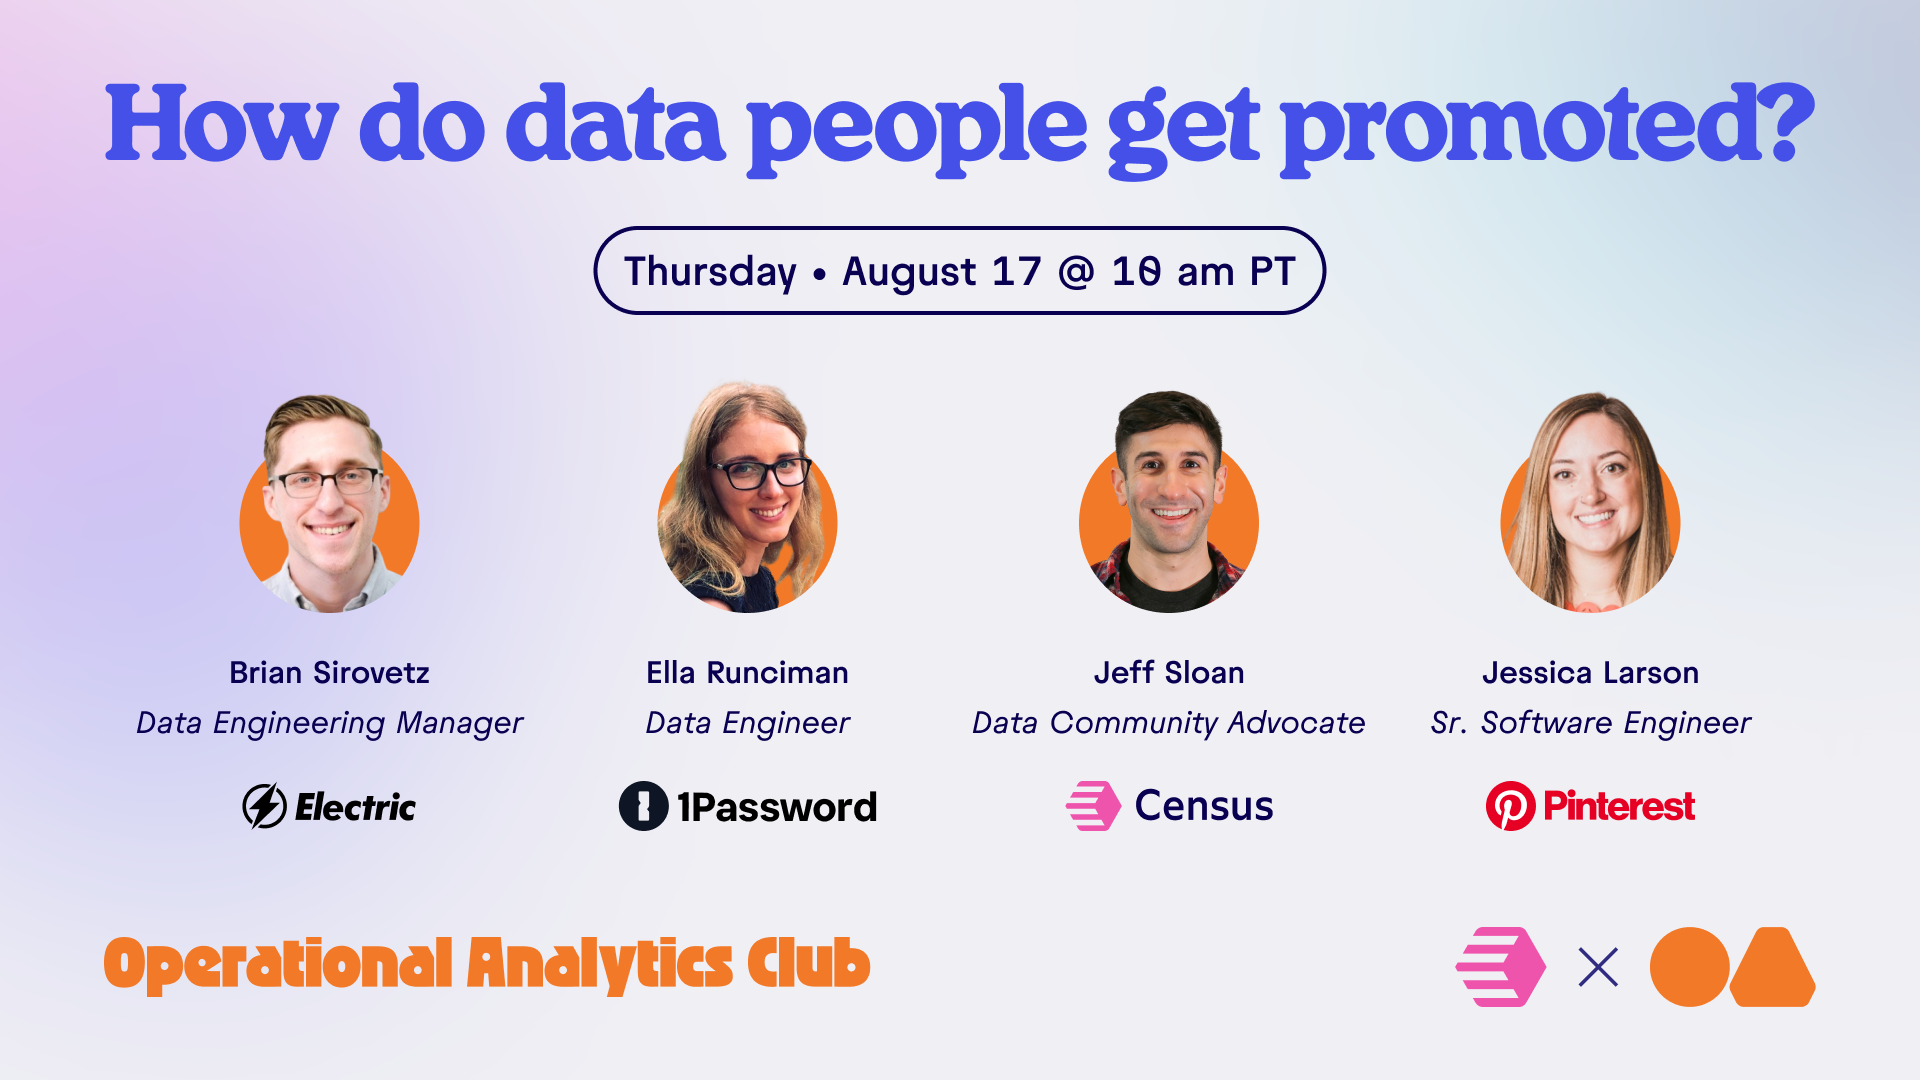 OA Club: How do Data People get Promoted?